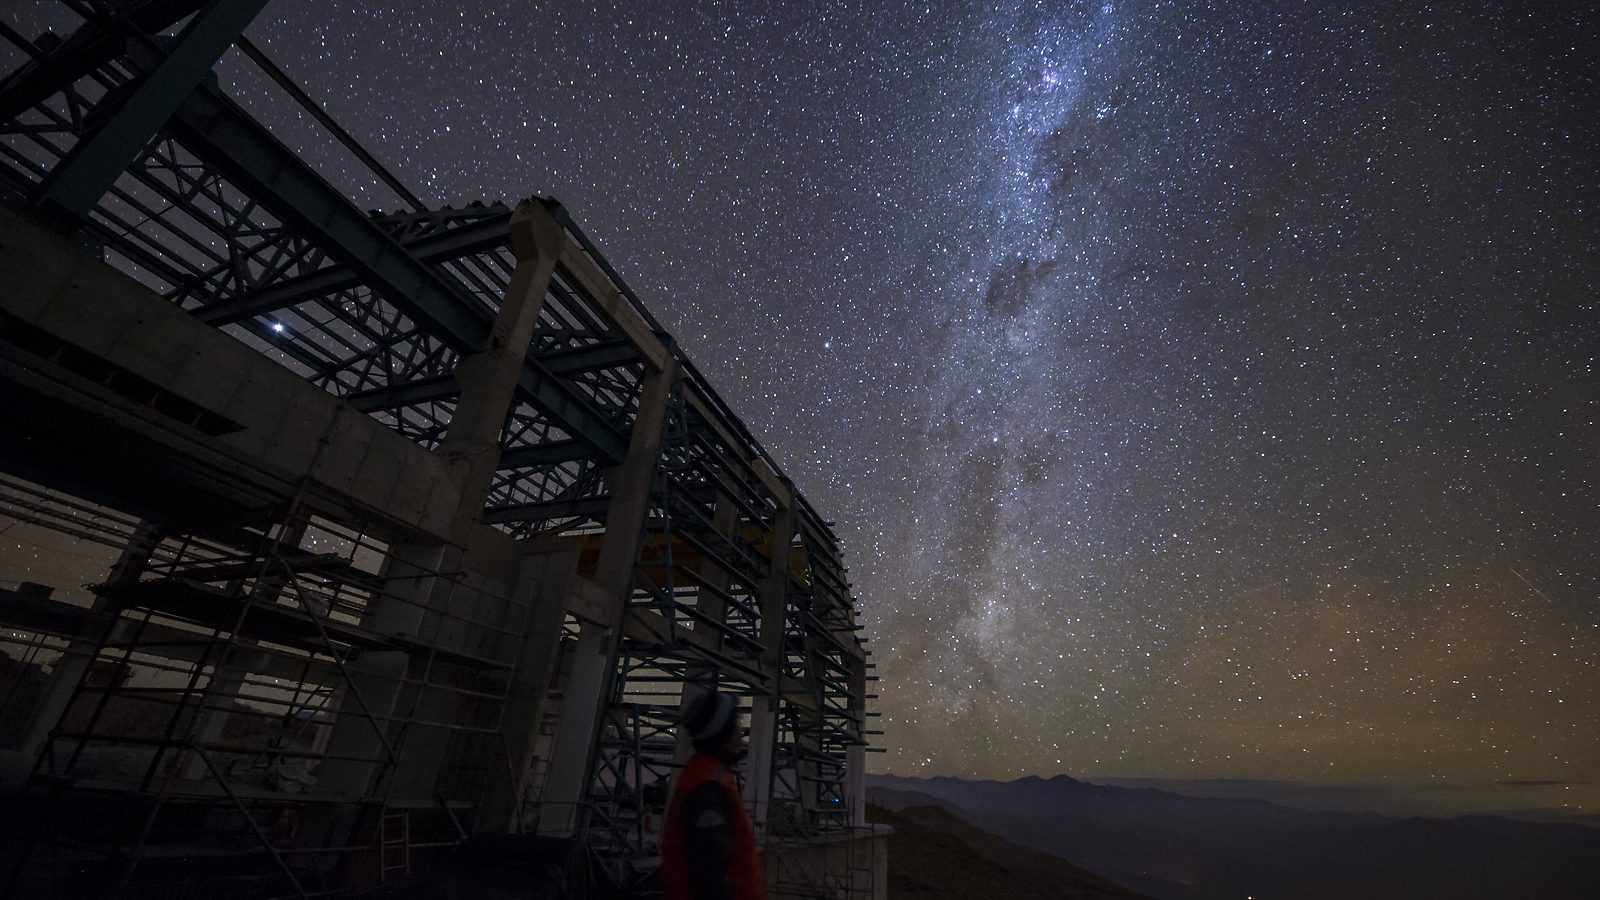 In March 2017 a multimedia team visited Cerro Pachón to document LSST Facility construction.